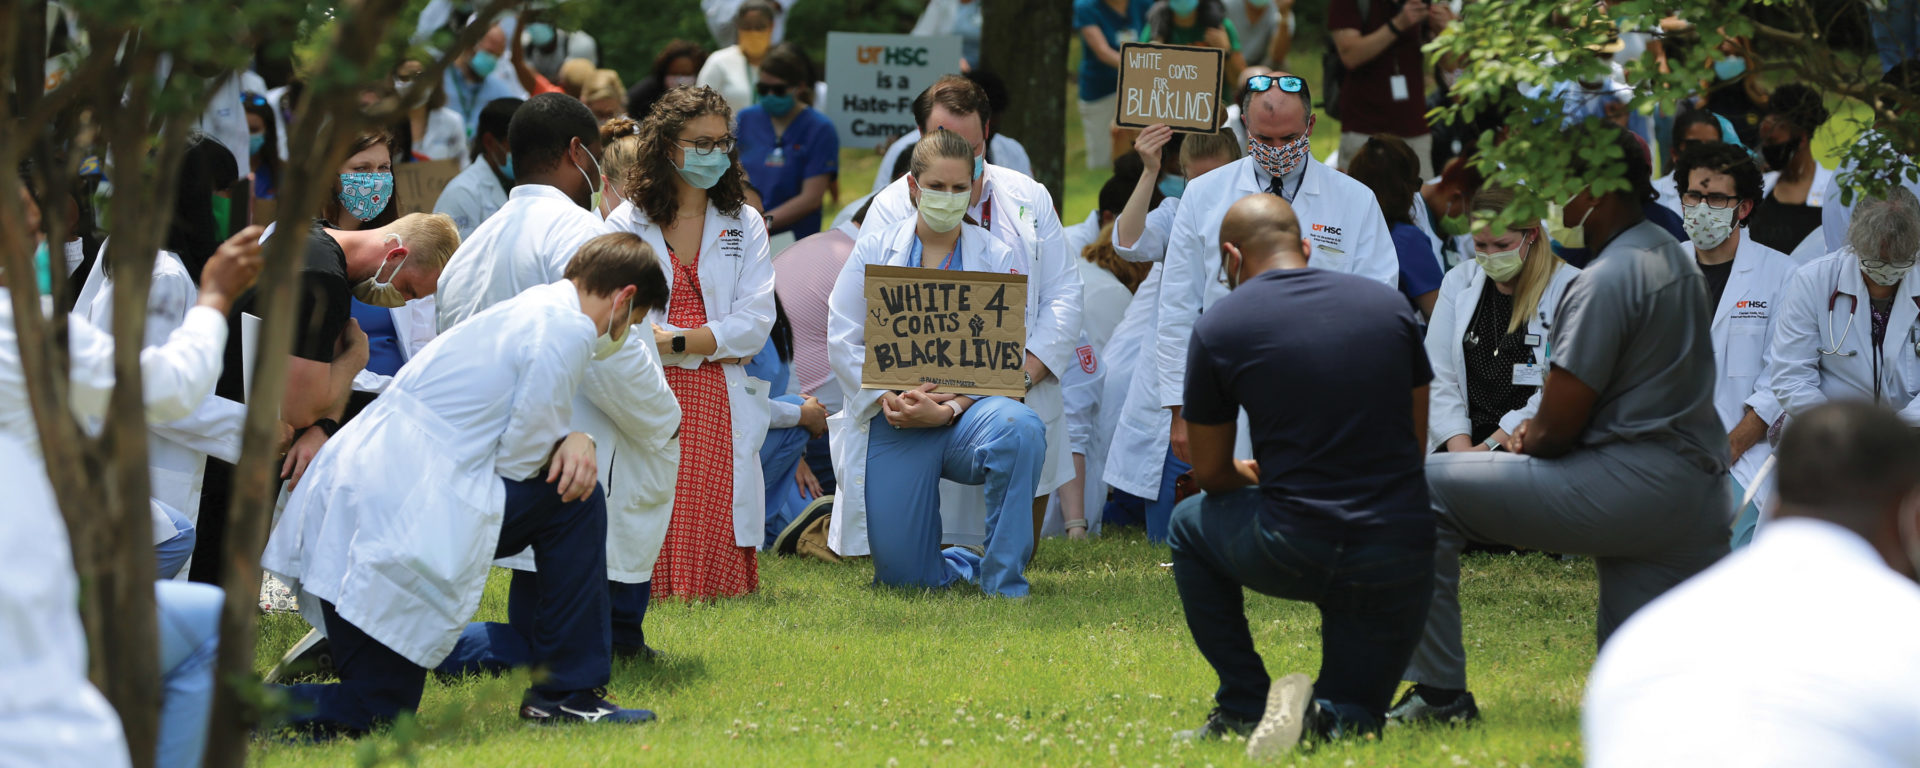 People of all races in white coats and scrubs kneel in the grass, wearing face masks and holding protest signs